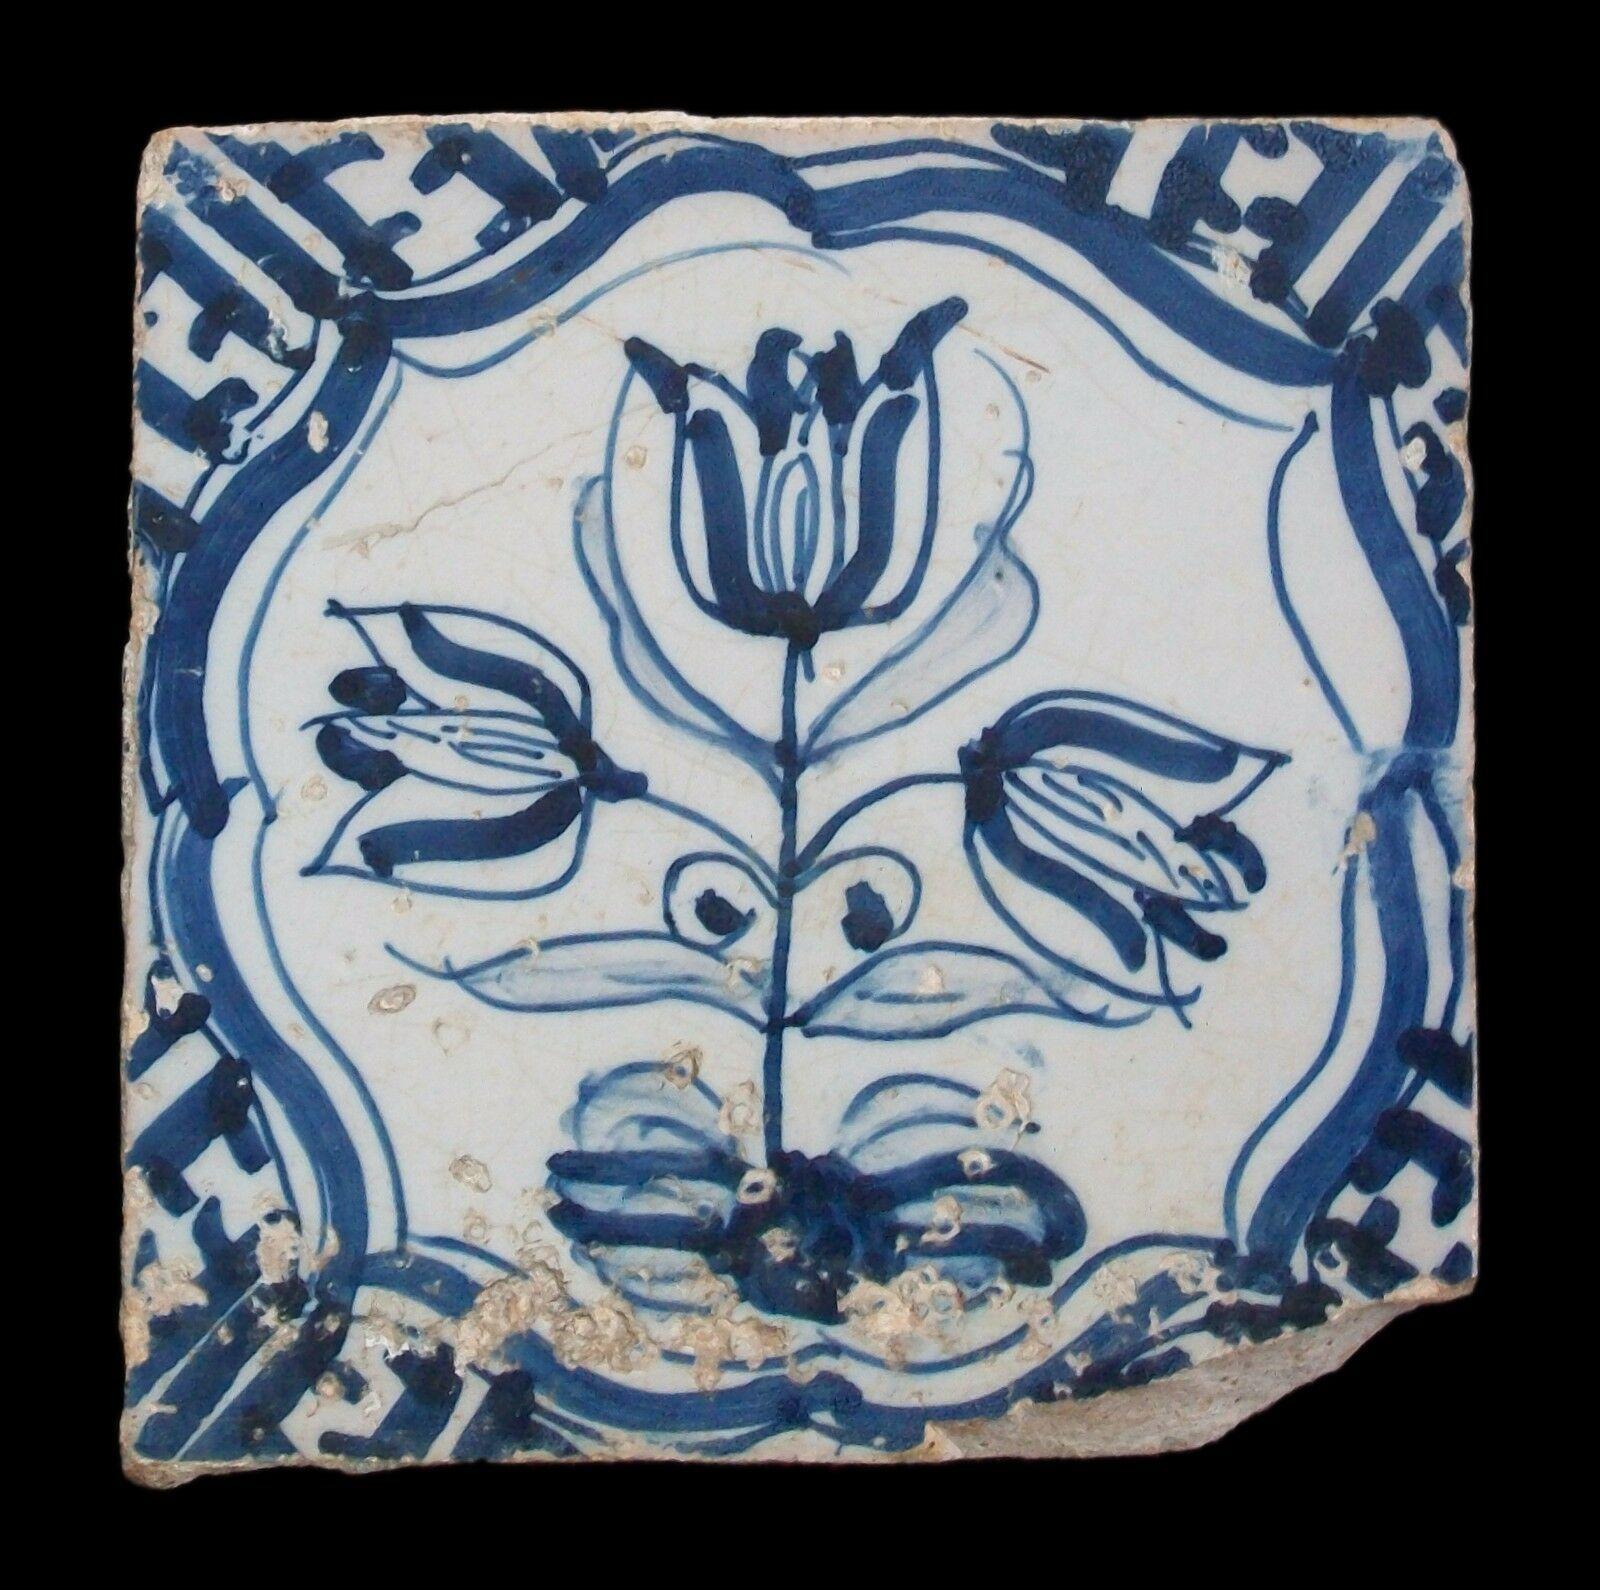 Rare antique Dutch Delft ceramic tile - hand painted featuring tulips within a scrolled cartouche - elaborate details to the border - unsigned - Holland - 17th century.

Fair antique condition - loss and glaze chips - damage with old firing crack